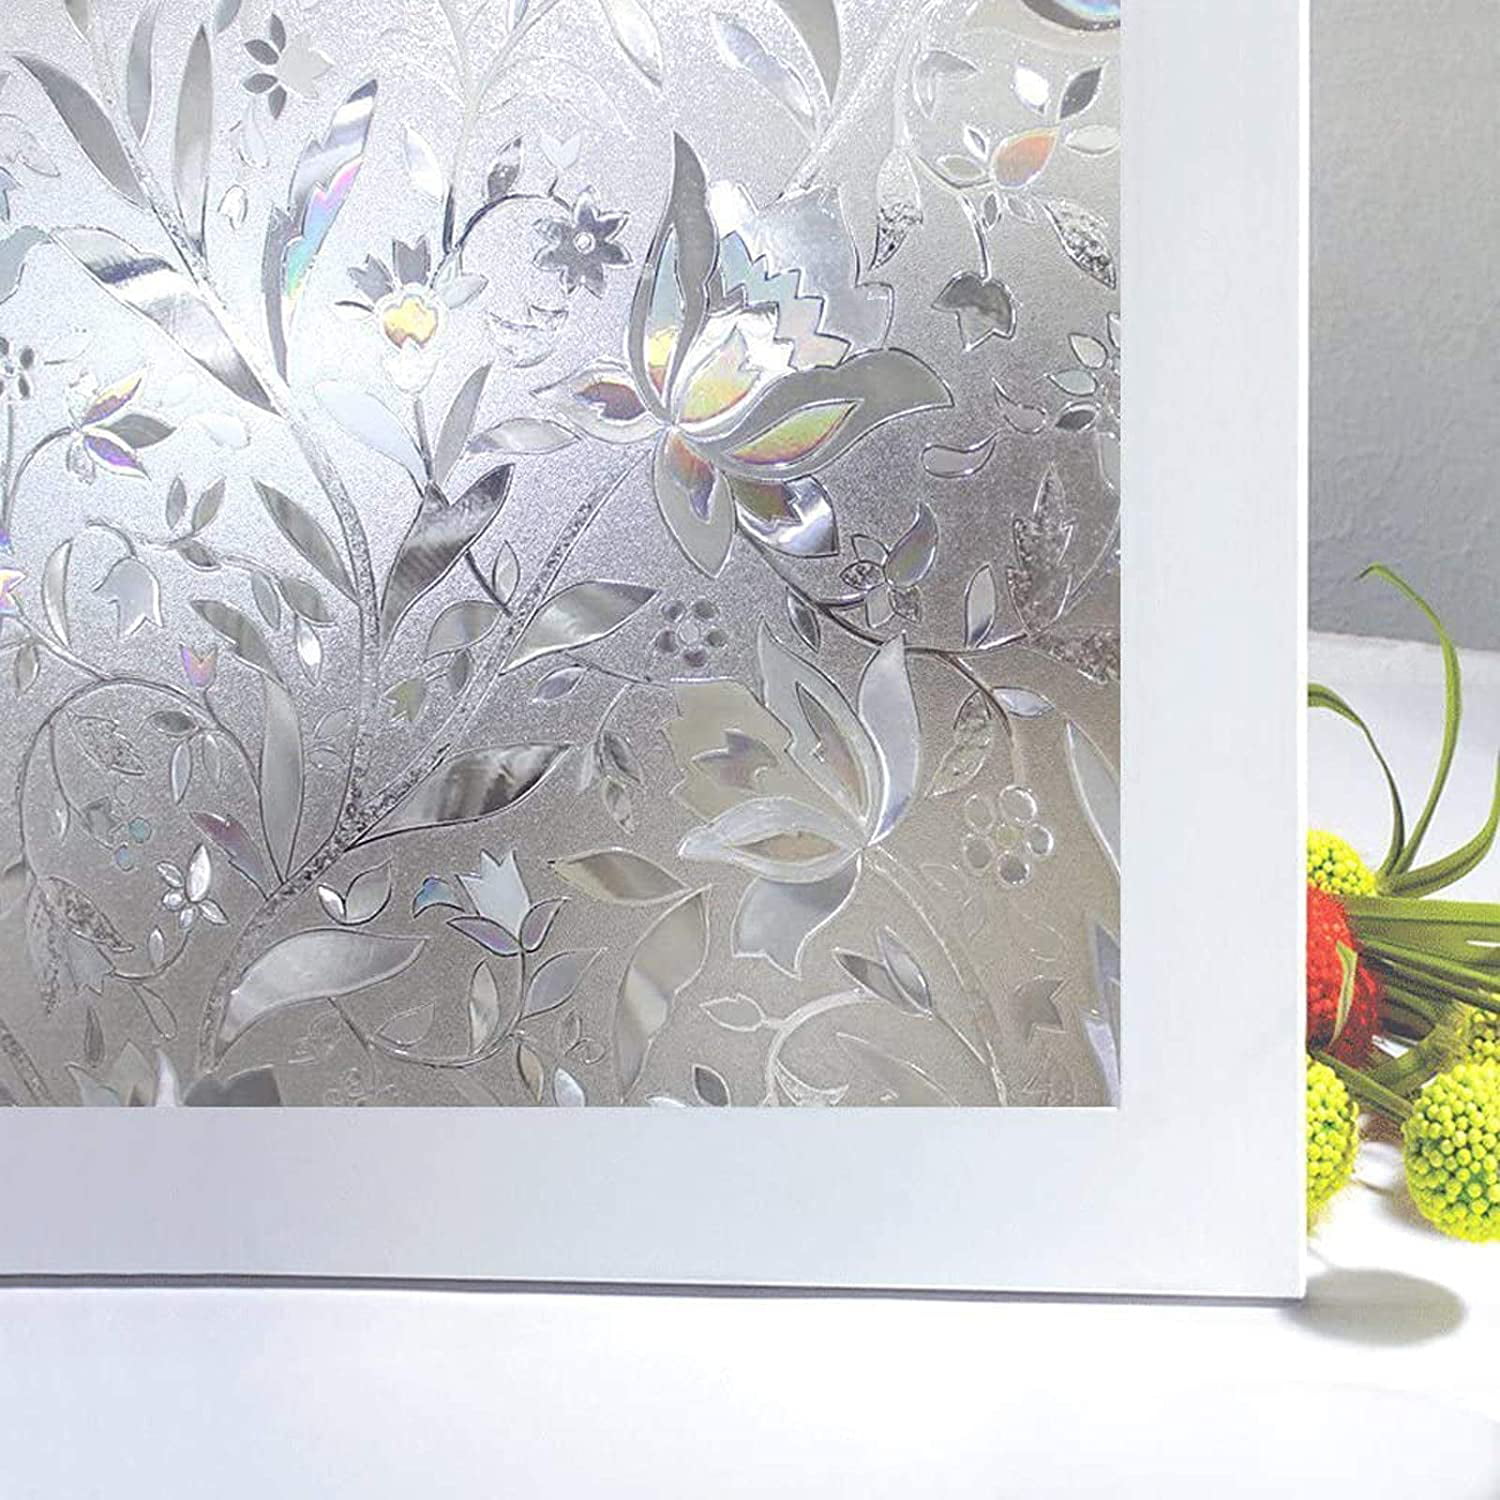 Privacy Window Film 3D Static Decoration Self-adhesive Glass Film for UV Rejection Heat Control Glass Window Stickers